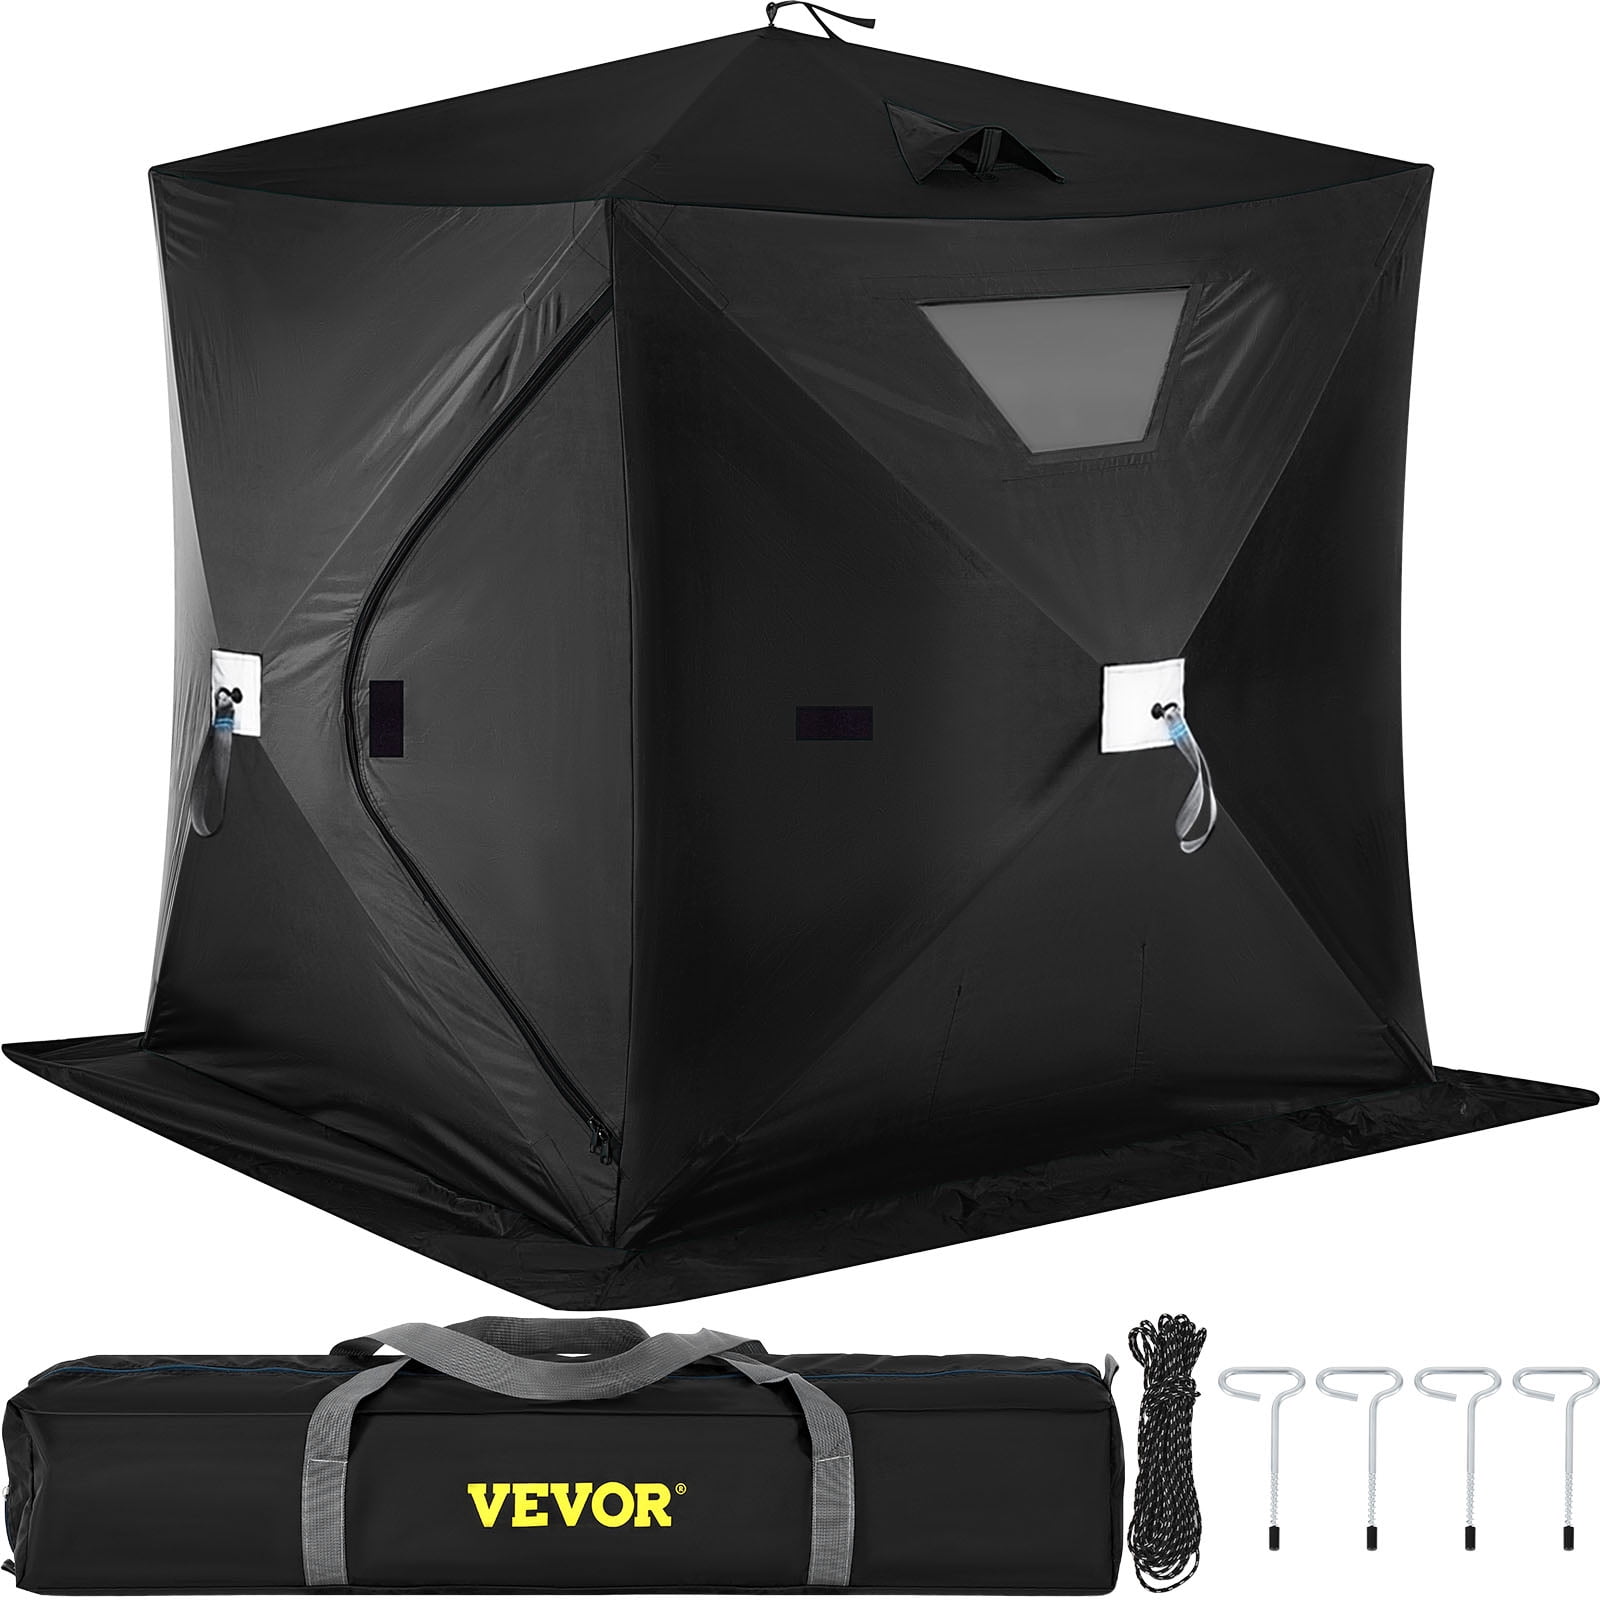 Details about   2 Person Portable Ice Shelter Fishing Tent with Bag Of Tough 300d Oxford Fabric 